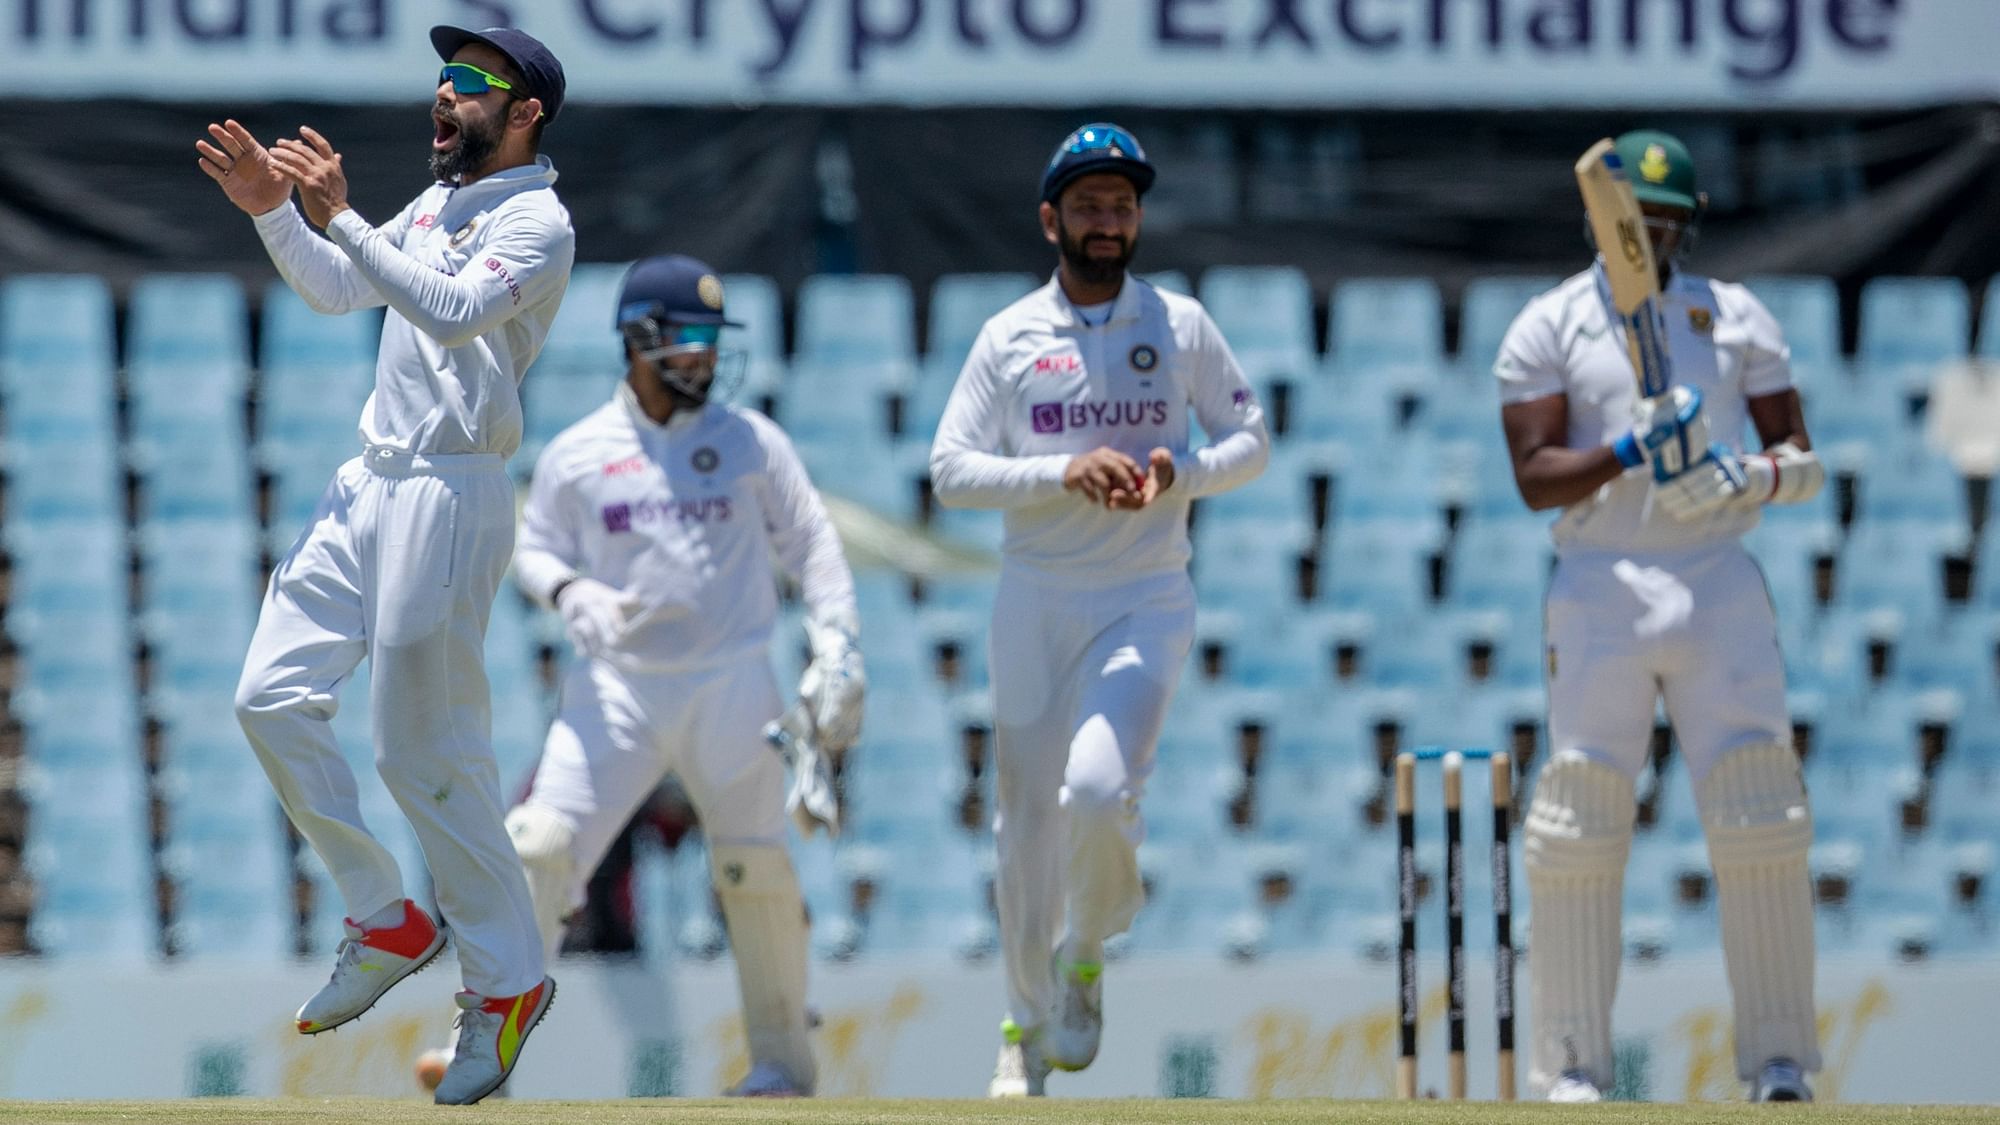 <div class="paragraphs"><p>India Test captain Virat Kohli, left, celebrates the dismissal of South Africa batsman Lungi Ngidi during the fifth day of the first Test match between South Africa and India at Centurion Park in Pretoria, South Africa on Thursday, 30 December.<br></p></div>